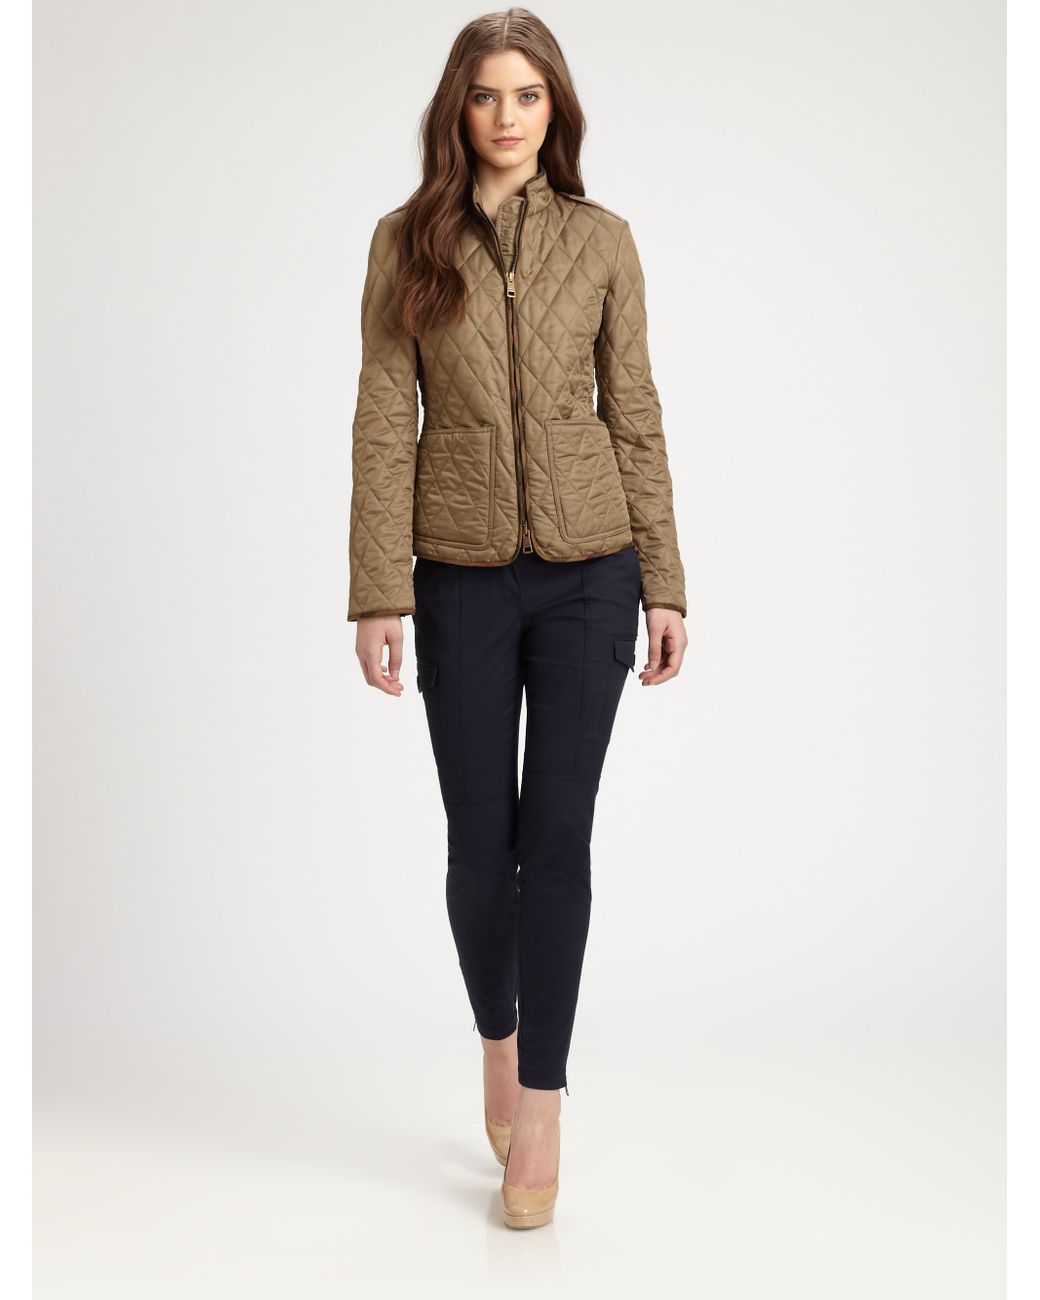 Burberry Brit Edgefield Quilted Jacket in Brown | Lyst